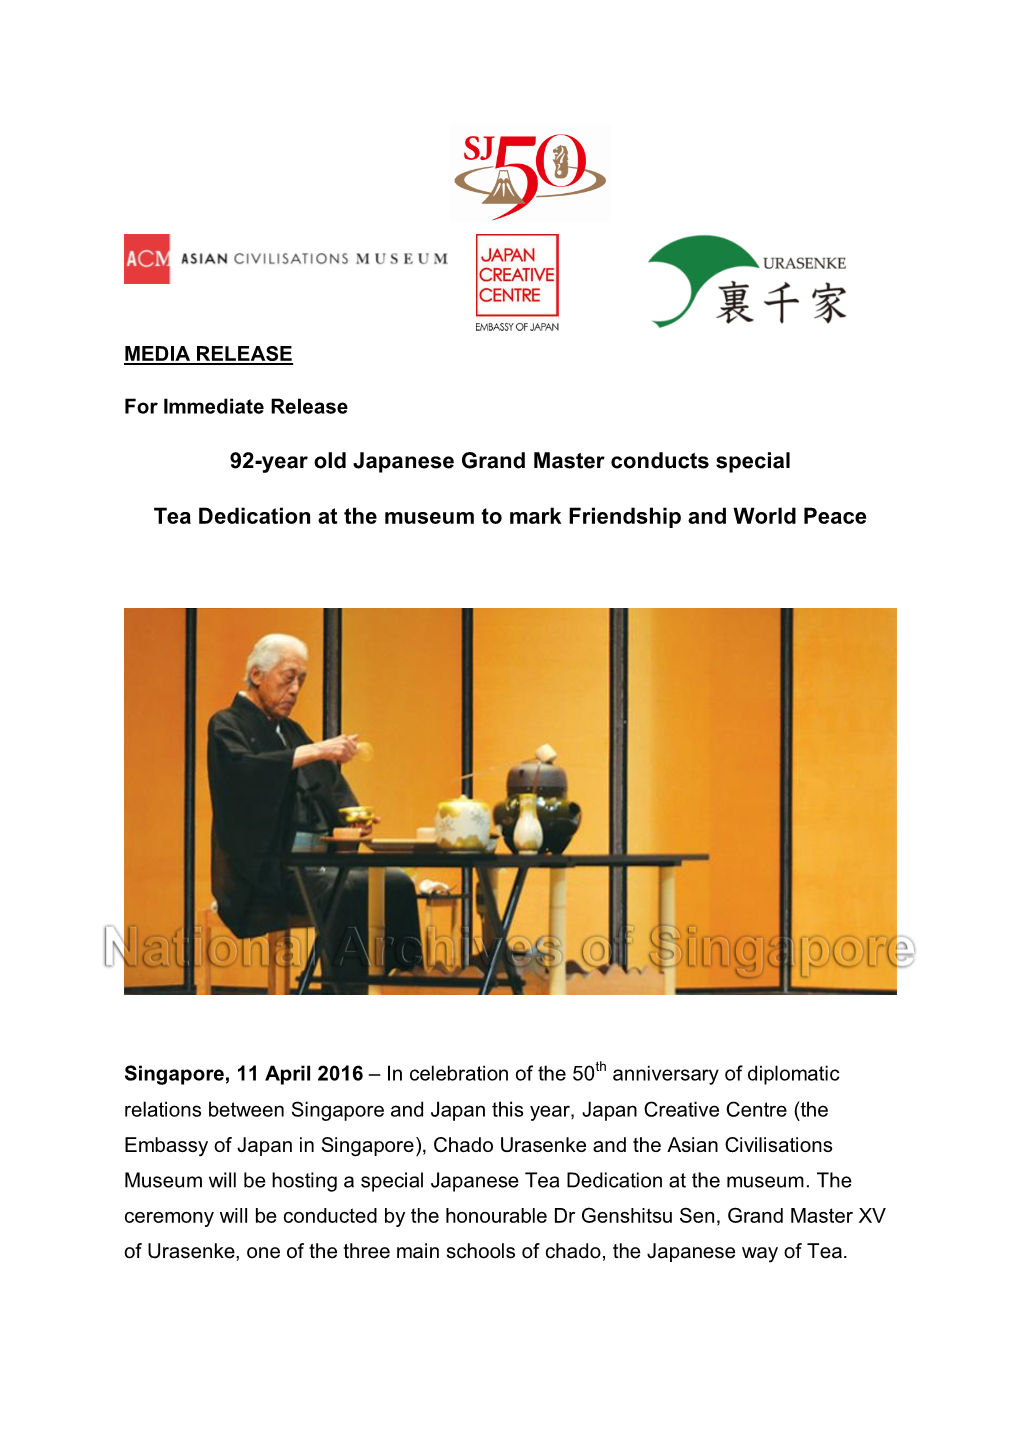 92-Year Old Japanese Grand Master Conducts Special Tea Dedication At